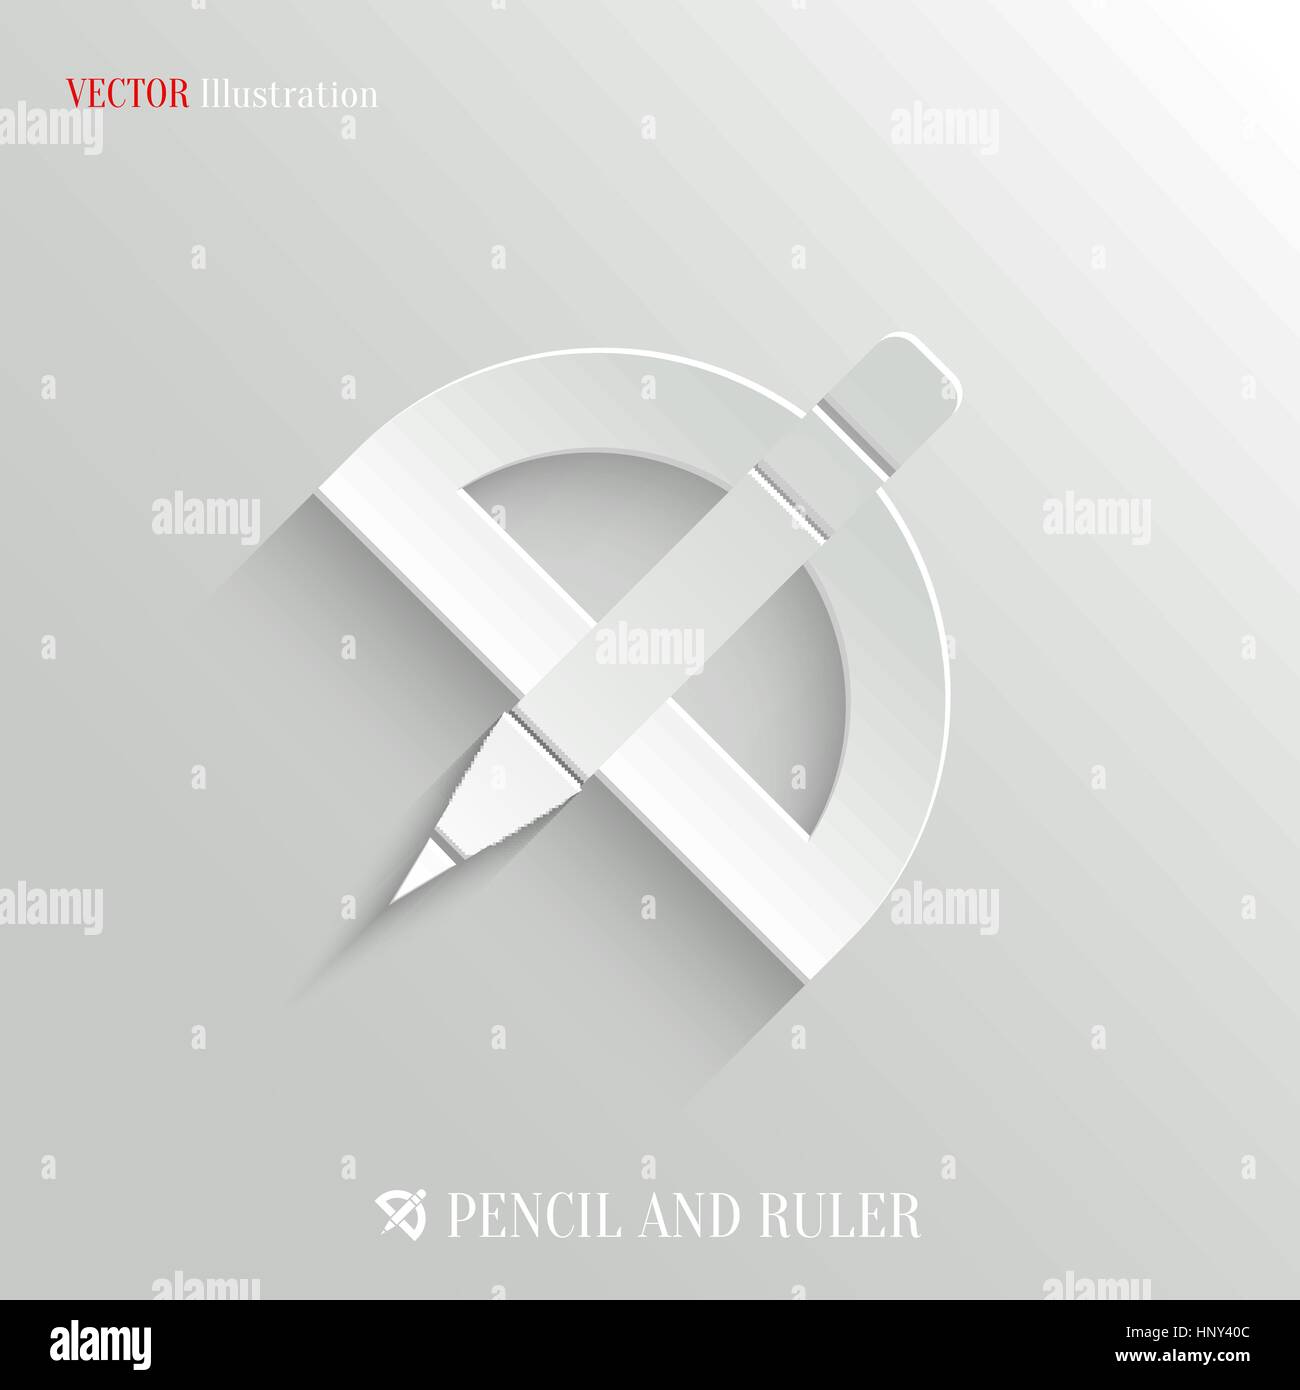 Pencil with ruler icon icon - vector education background with shadow Stock Vector